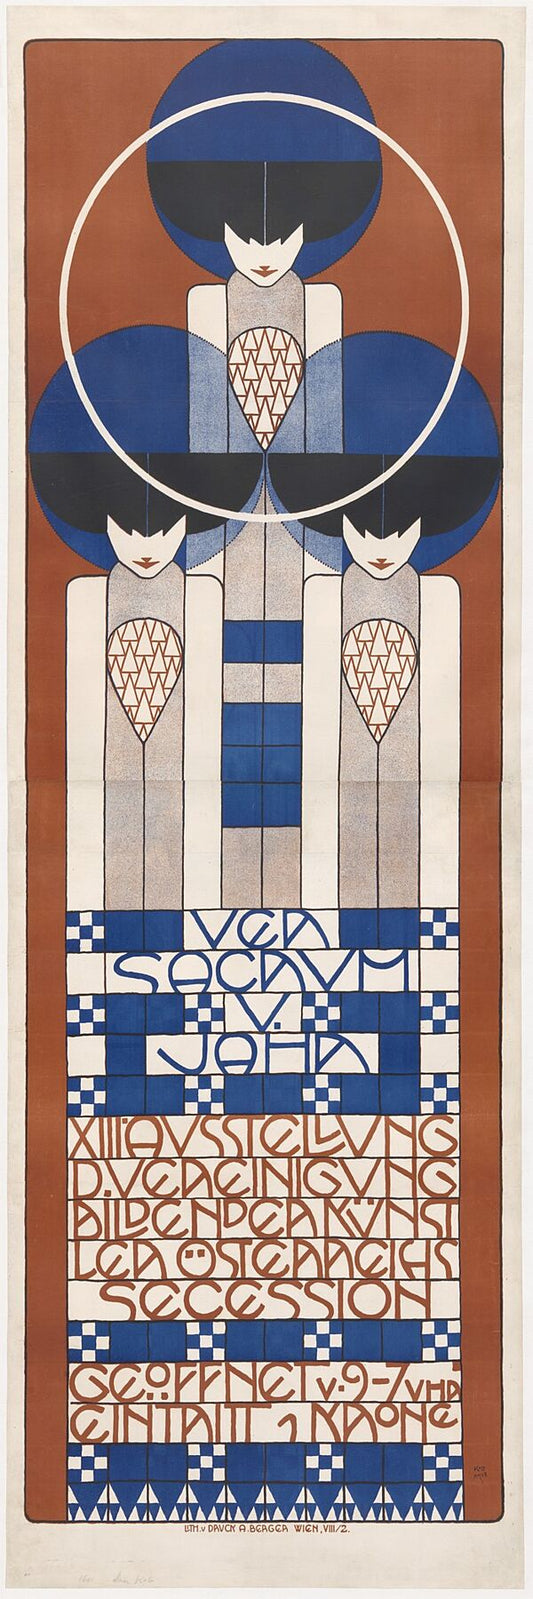 Ver Sacrum, XIII (Poster for the 13th Secession exhibition) by Koloman Moser - 1902